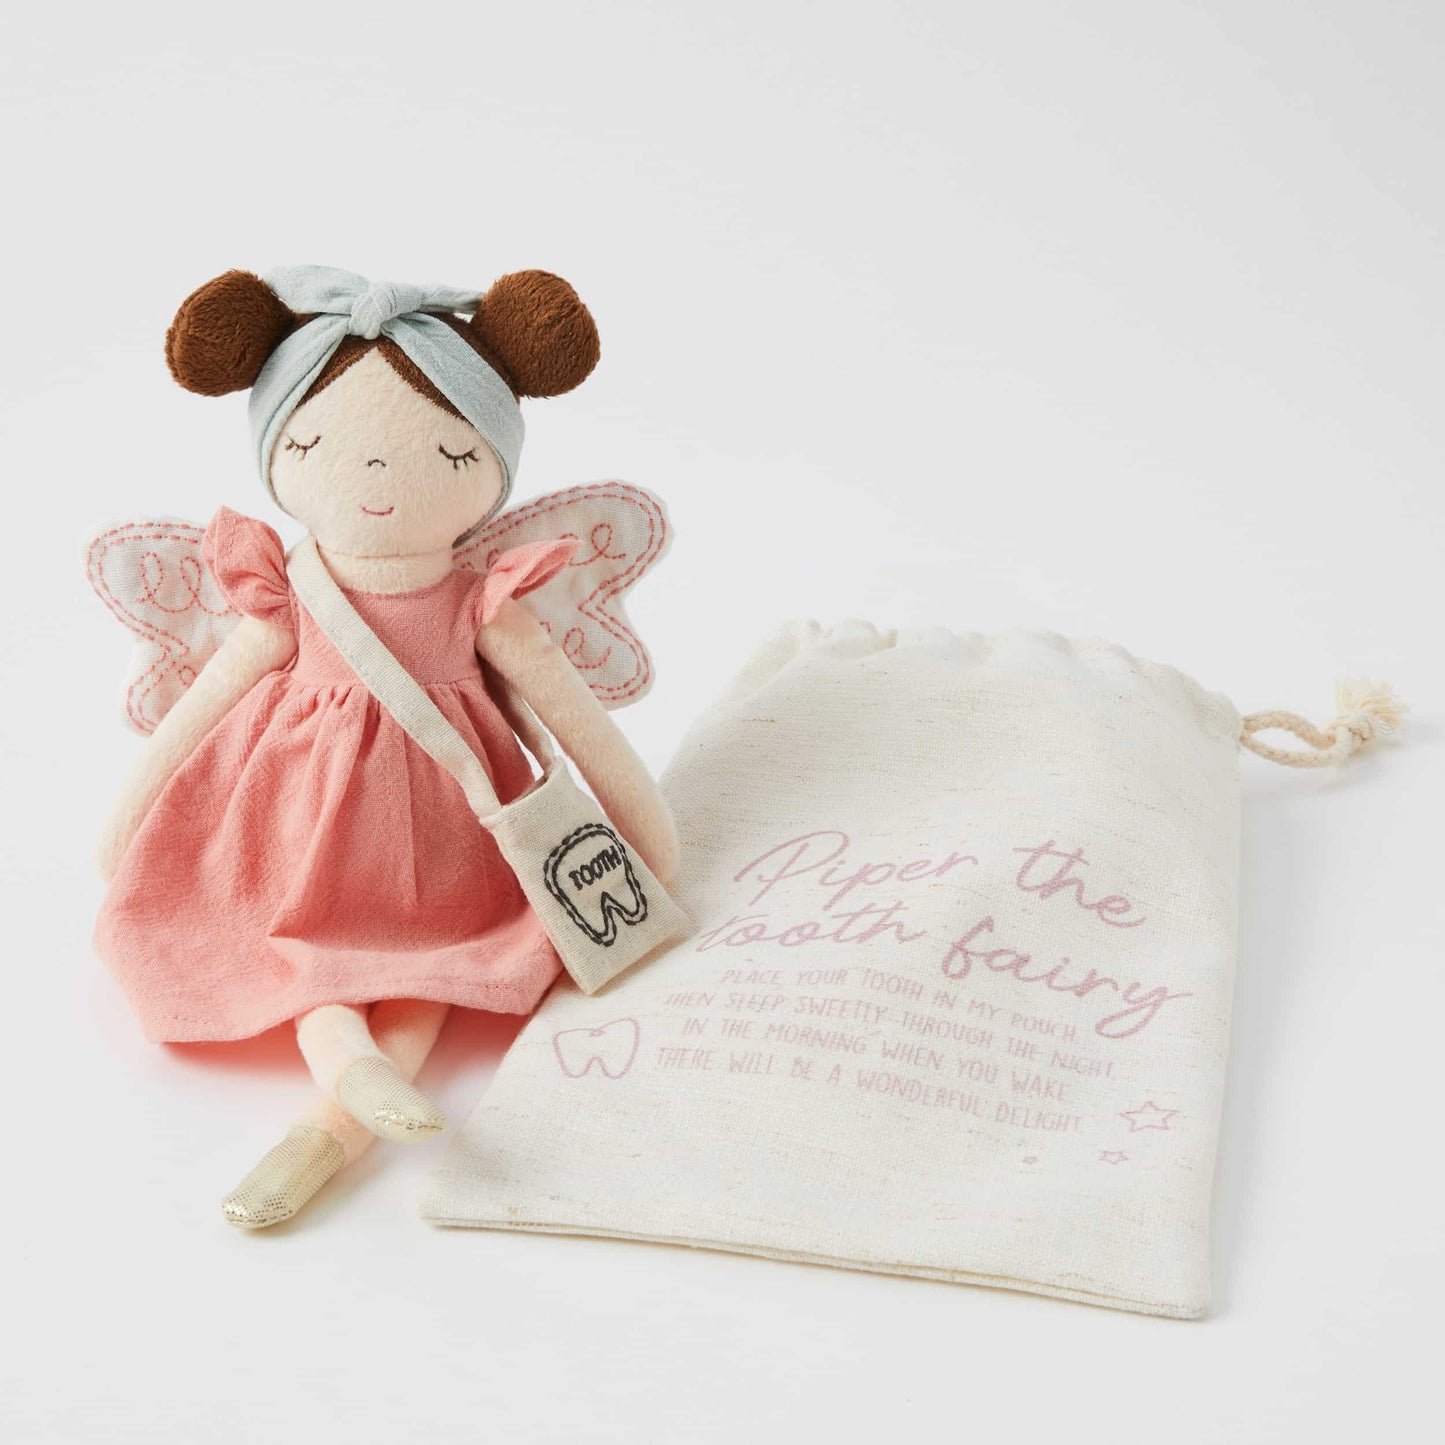 Piper the Tooth Fairy Teddy